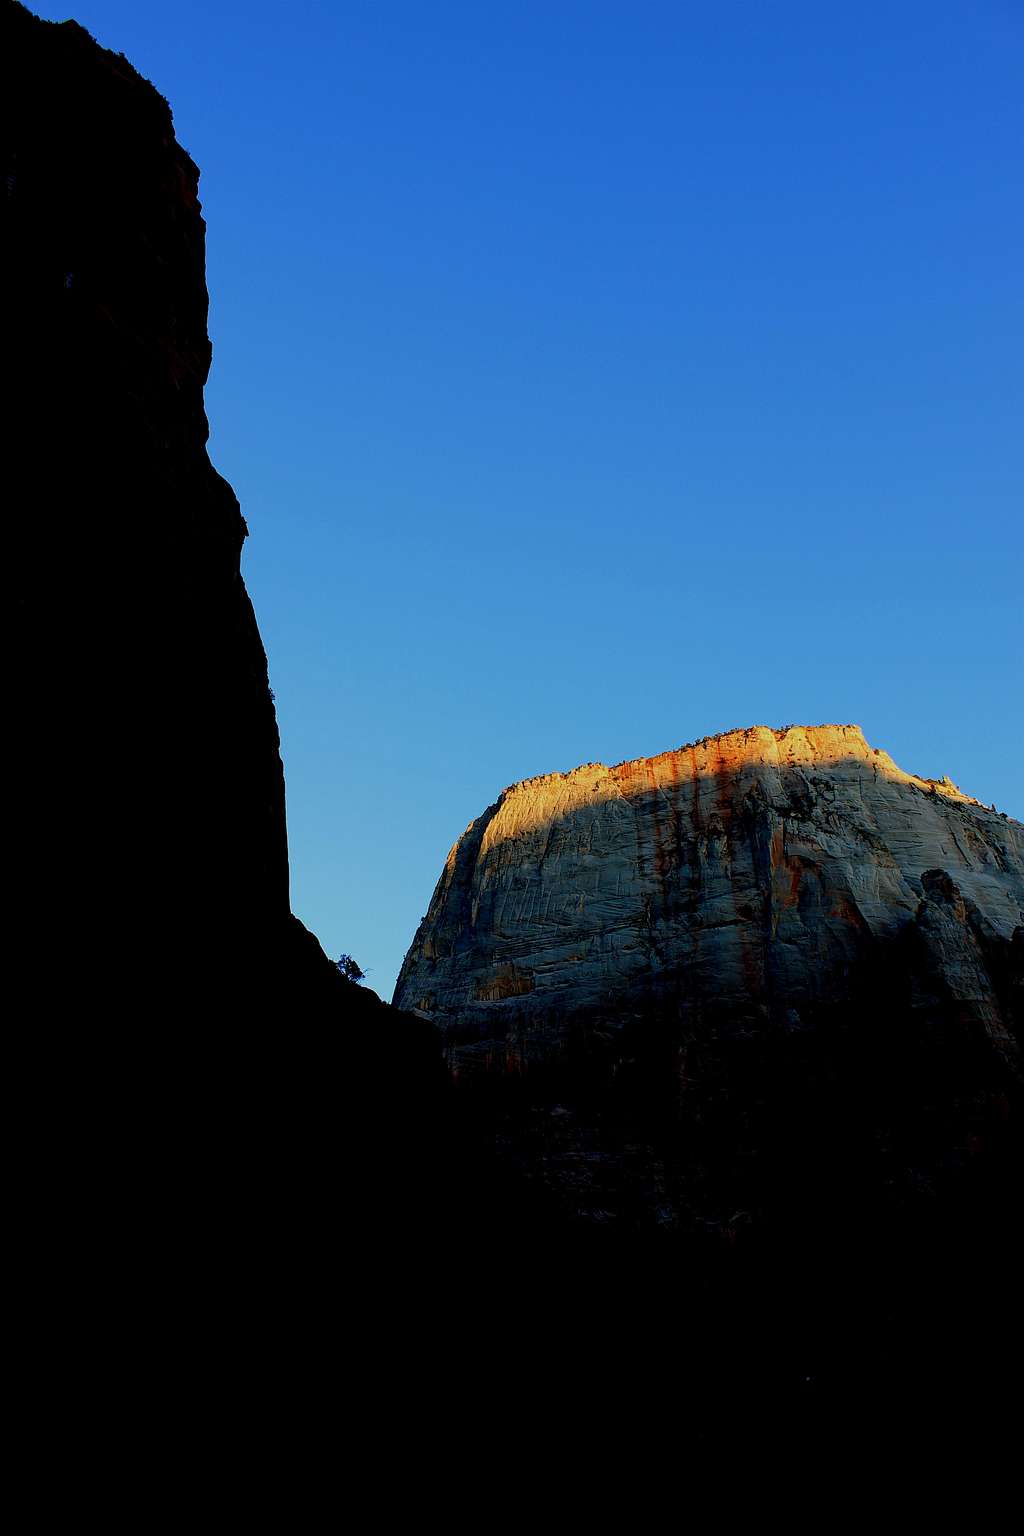 The Great White Throne - Zion National Park